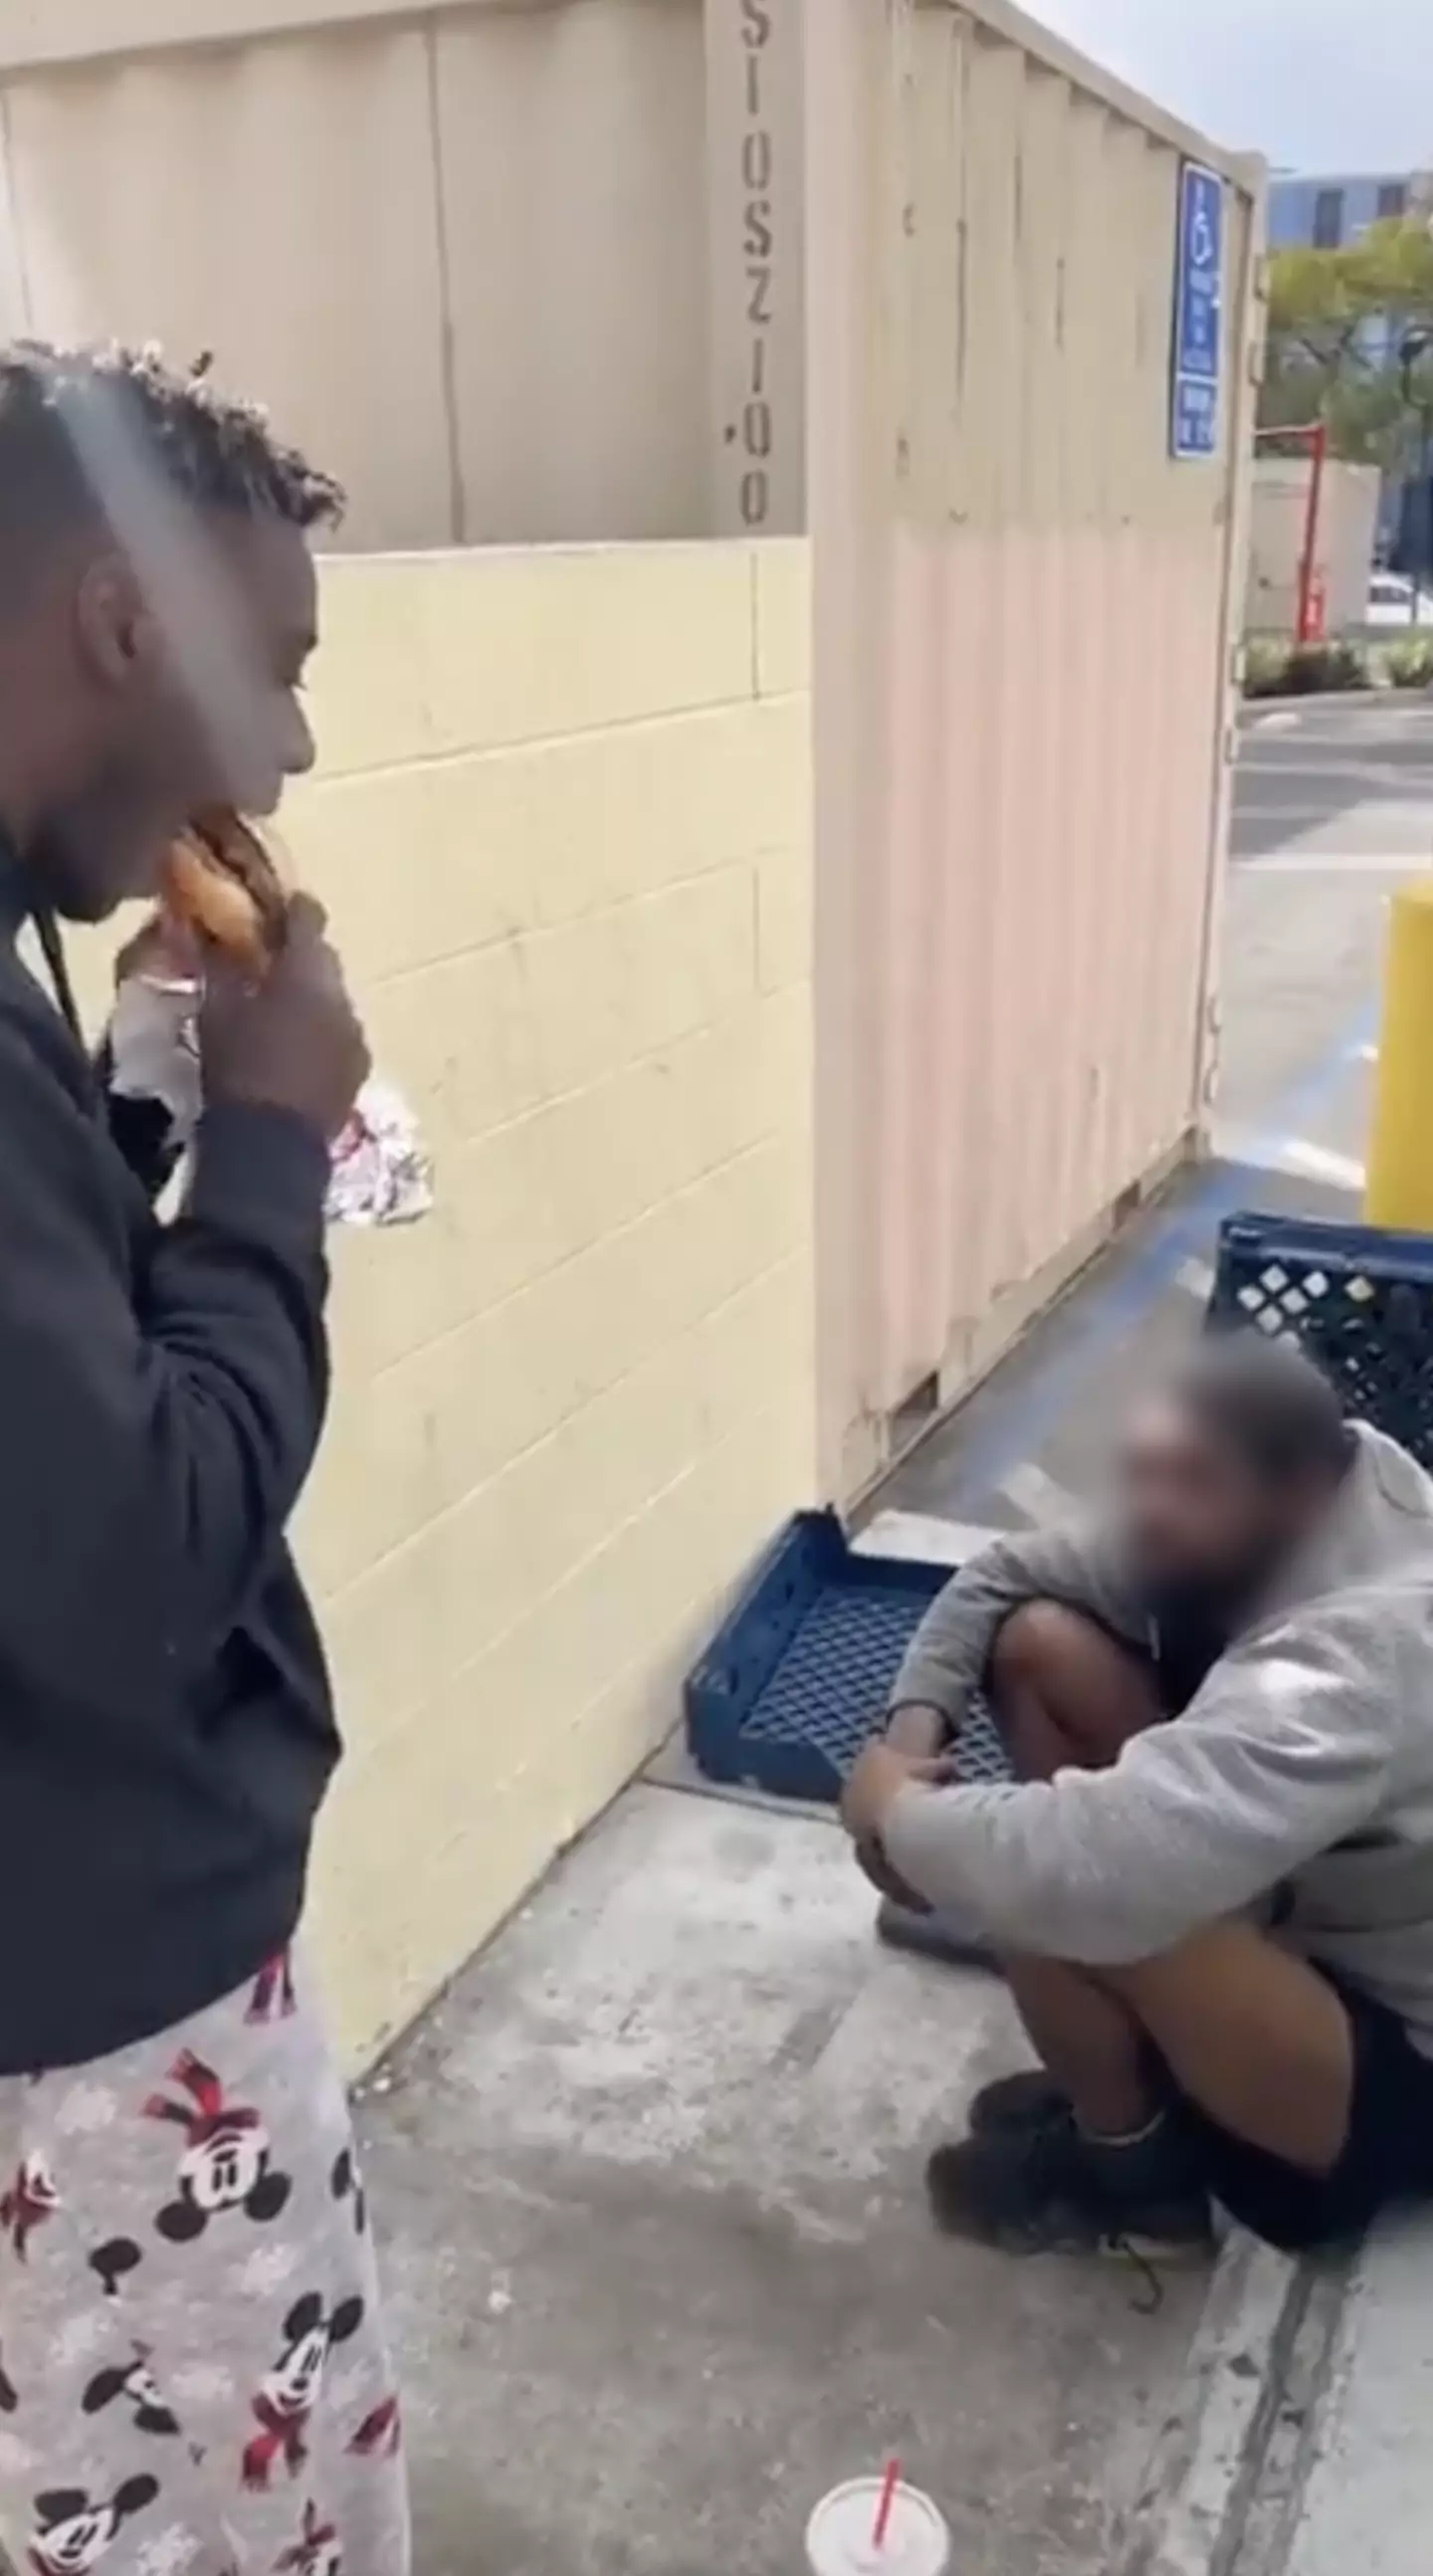 The YouTuber promised to get the homeless man a meal.